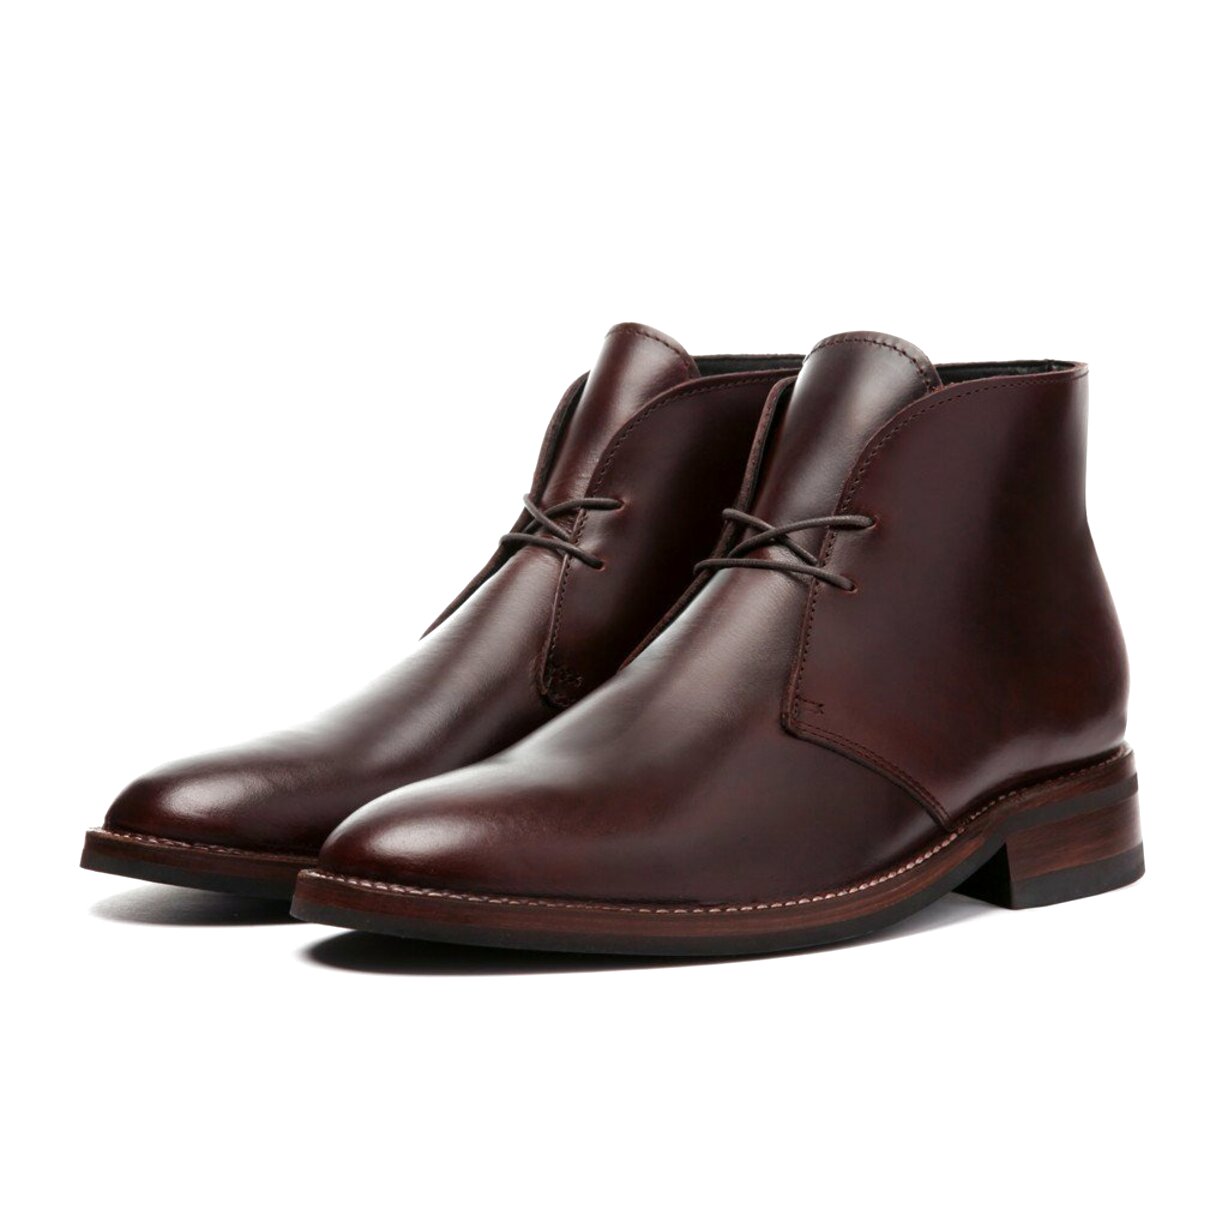 Mens Brown Chukka Boots for sale in UK | 59 used Mens Brown Chukka Boots